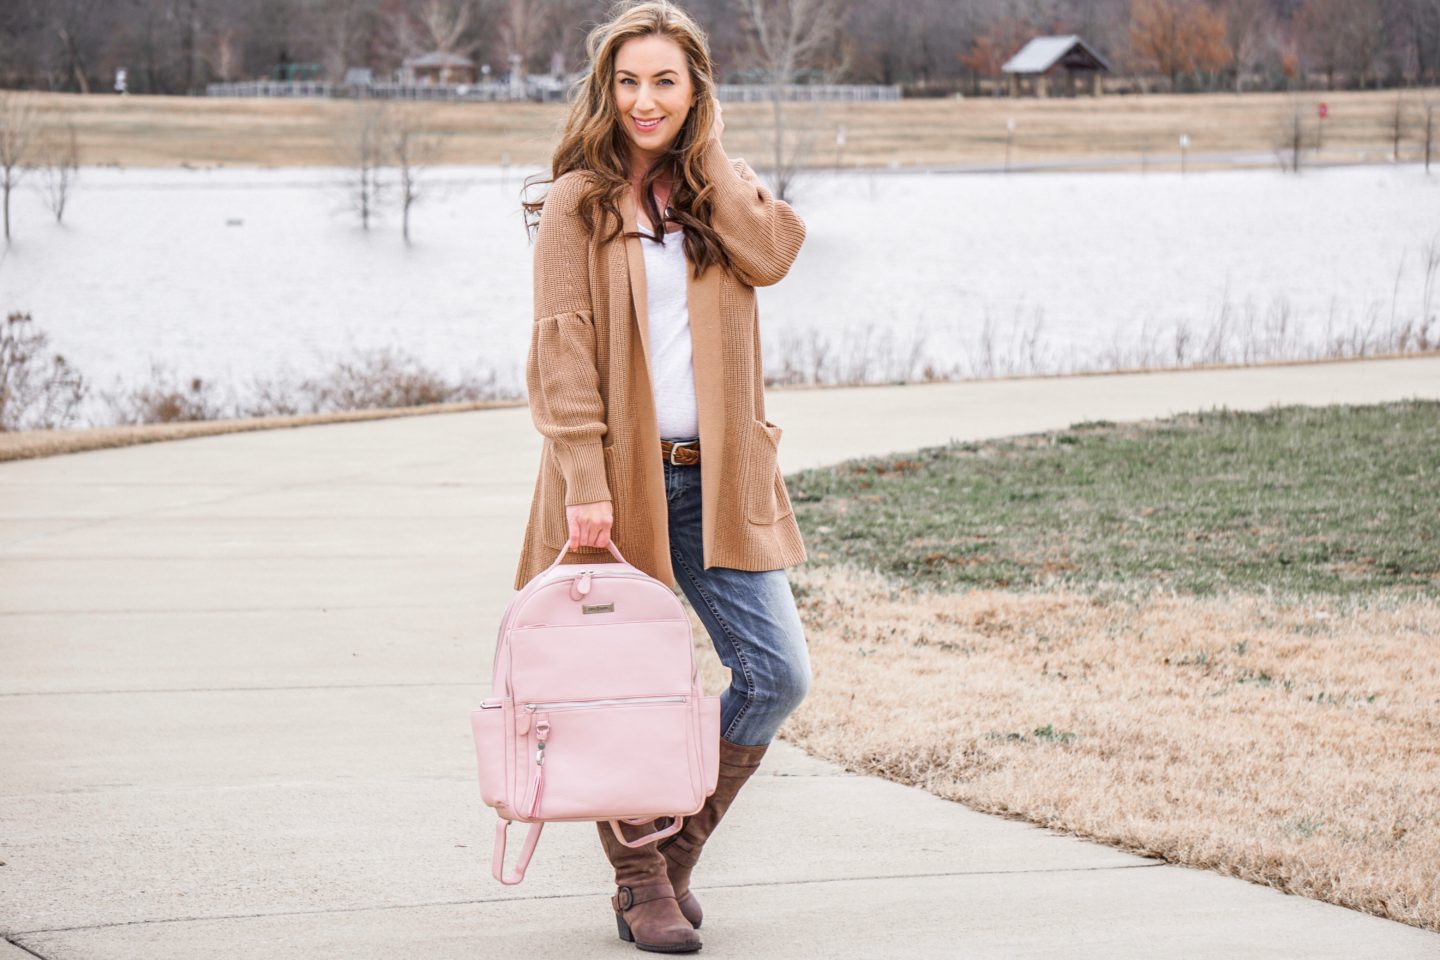 lily jade anna, anna backpack, large anna backpack, medium anna backpack, leather diaper bag, backpack, review, comparison, lily jade review, kateschwanke, kate schwanke